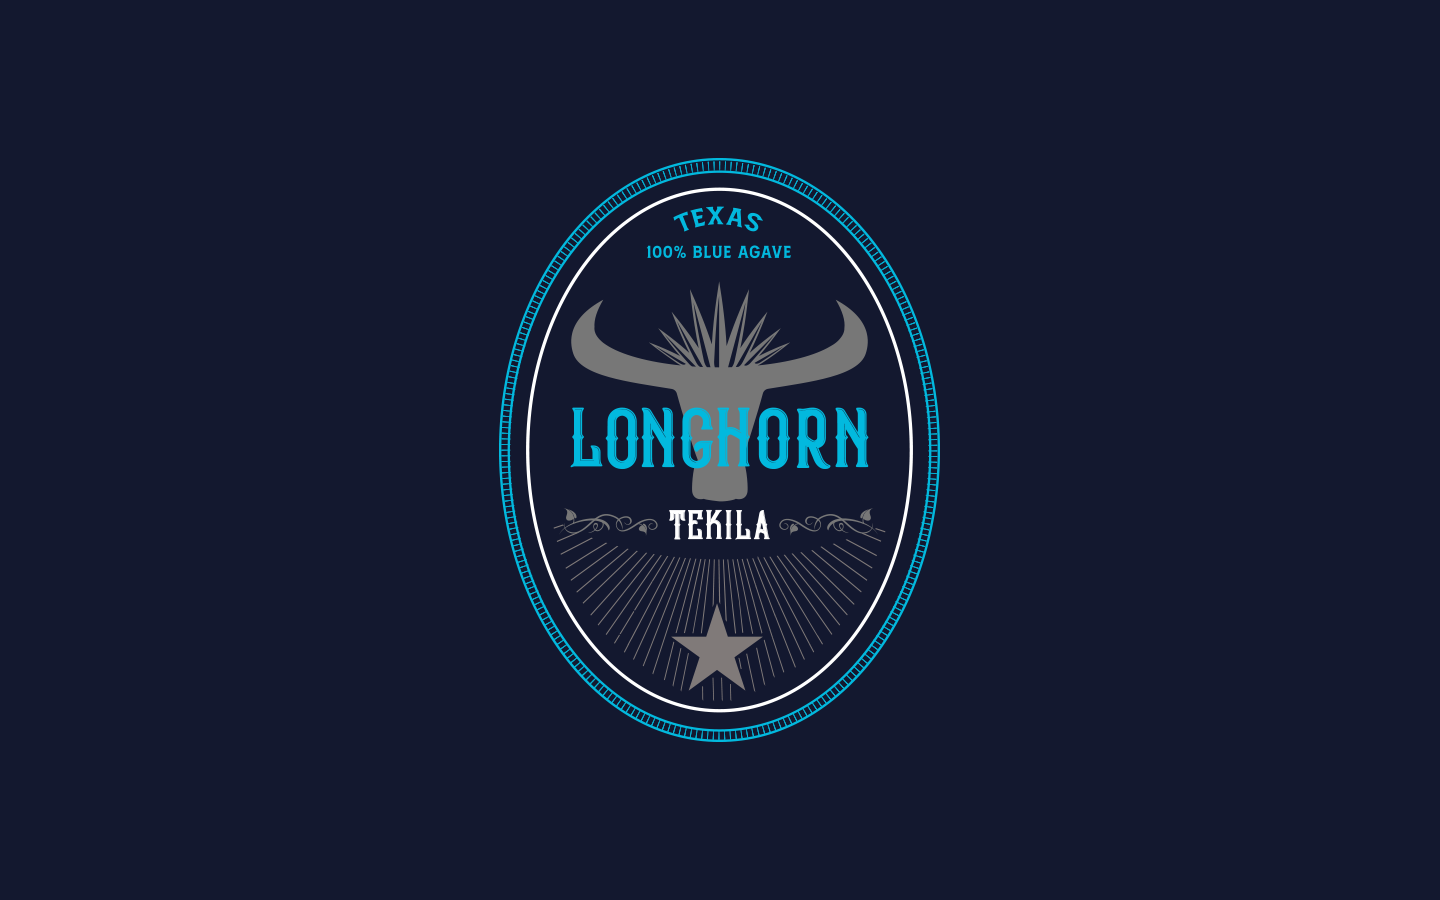 behance_Longhorn-Tequila_6.png